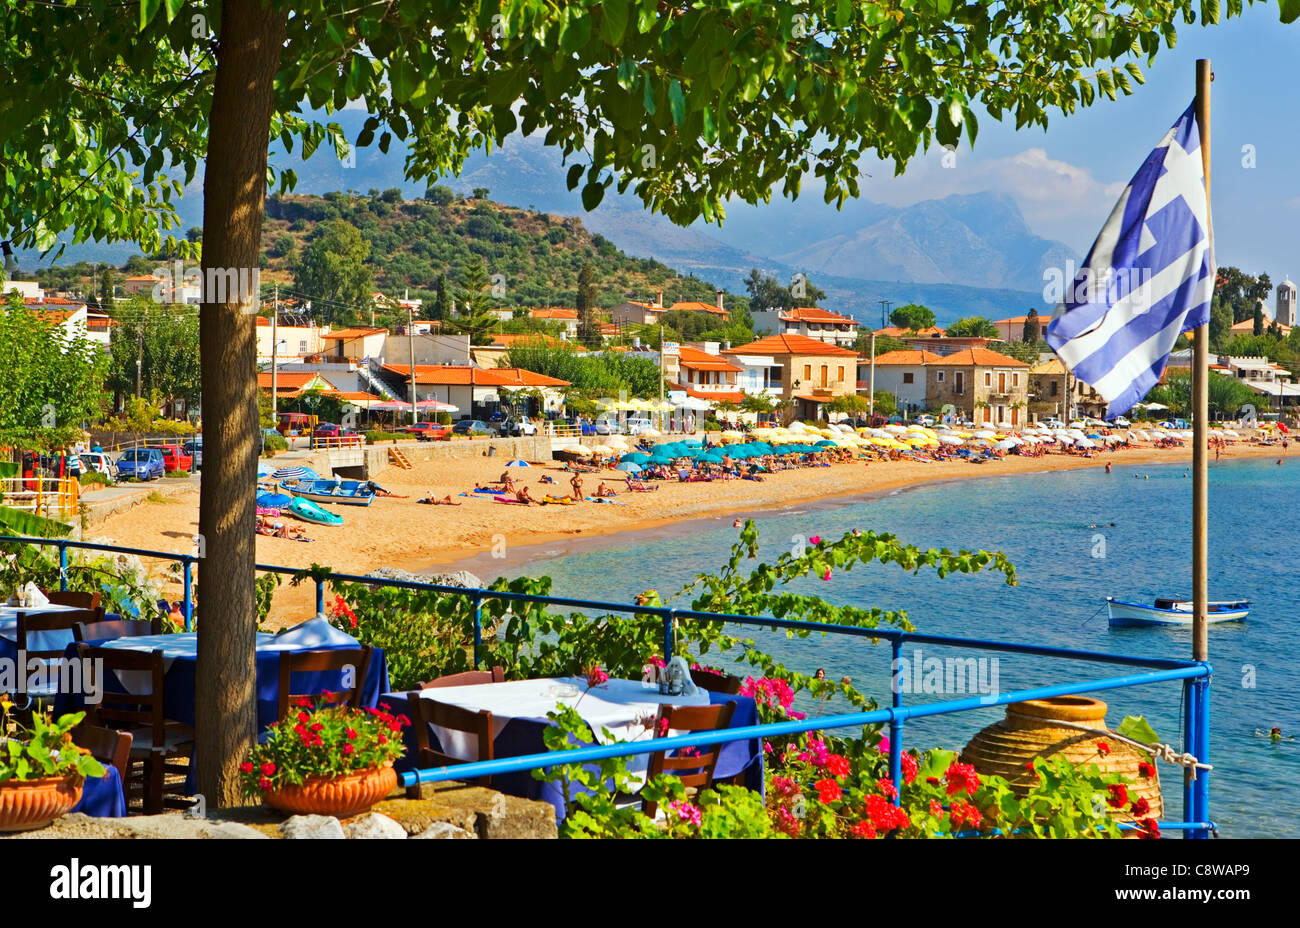 VIEW TO TOWN AND BEACH IN STOUPA GREECE Stock Photo